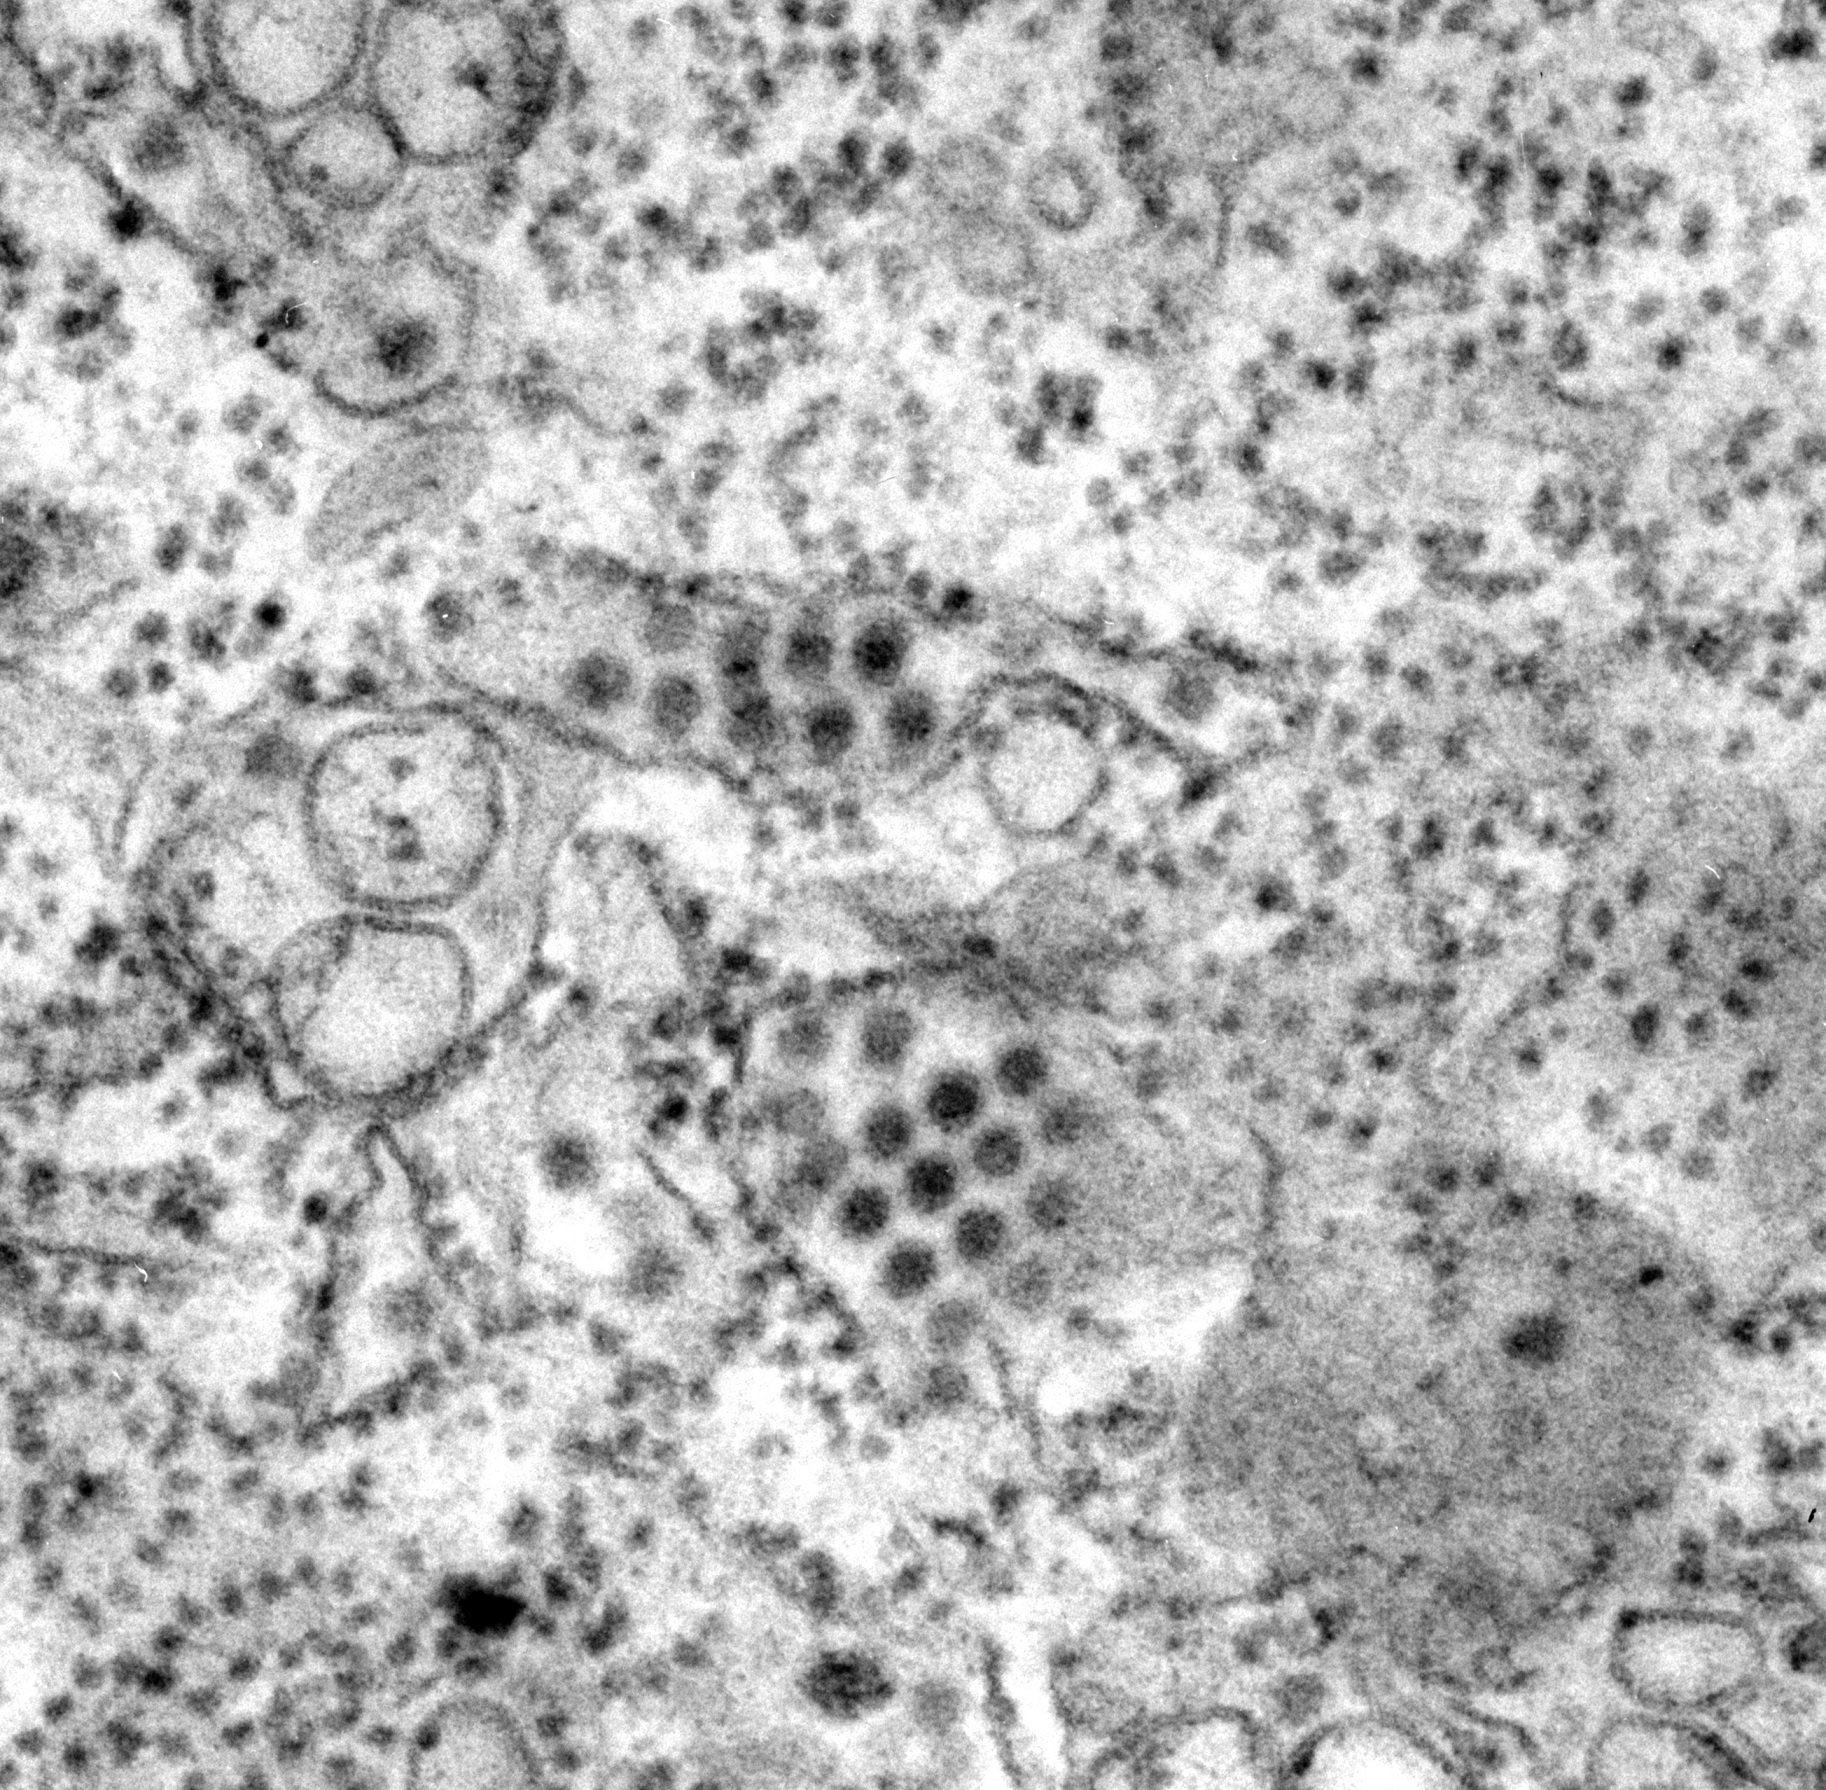 This transmission electron microscopic TEM image depicts a number of round Dengue virus particles that were revealed in th